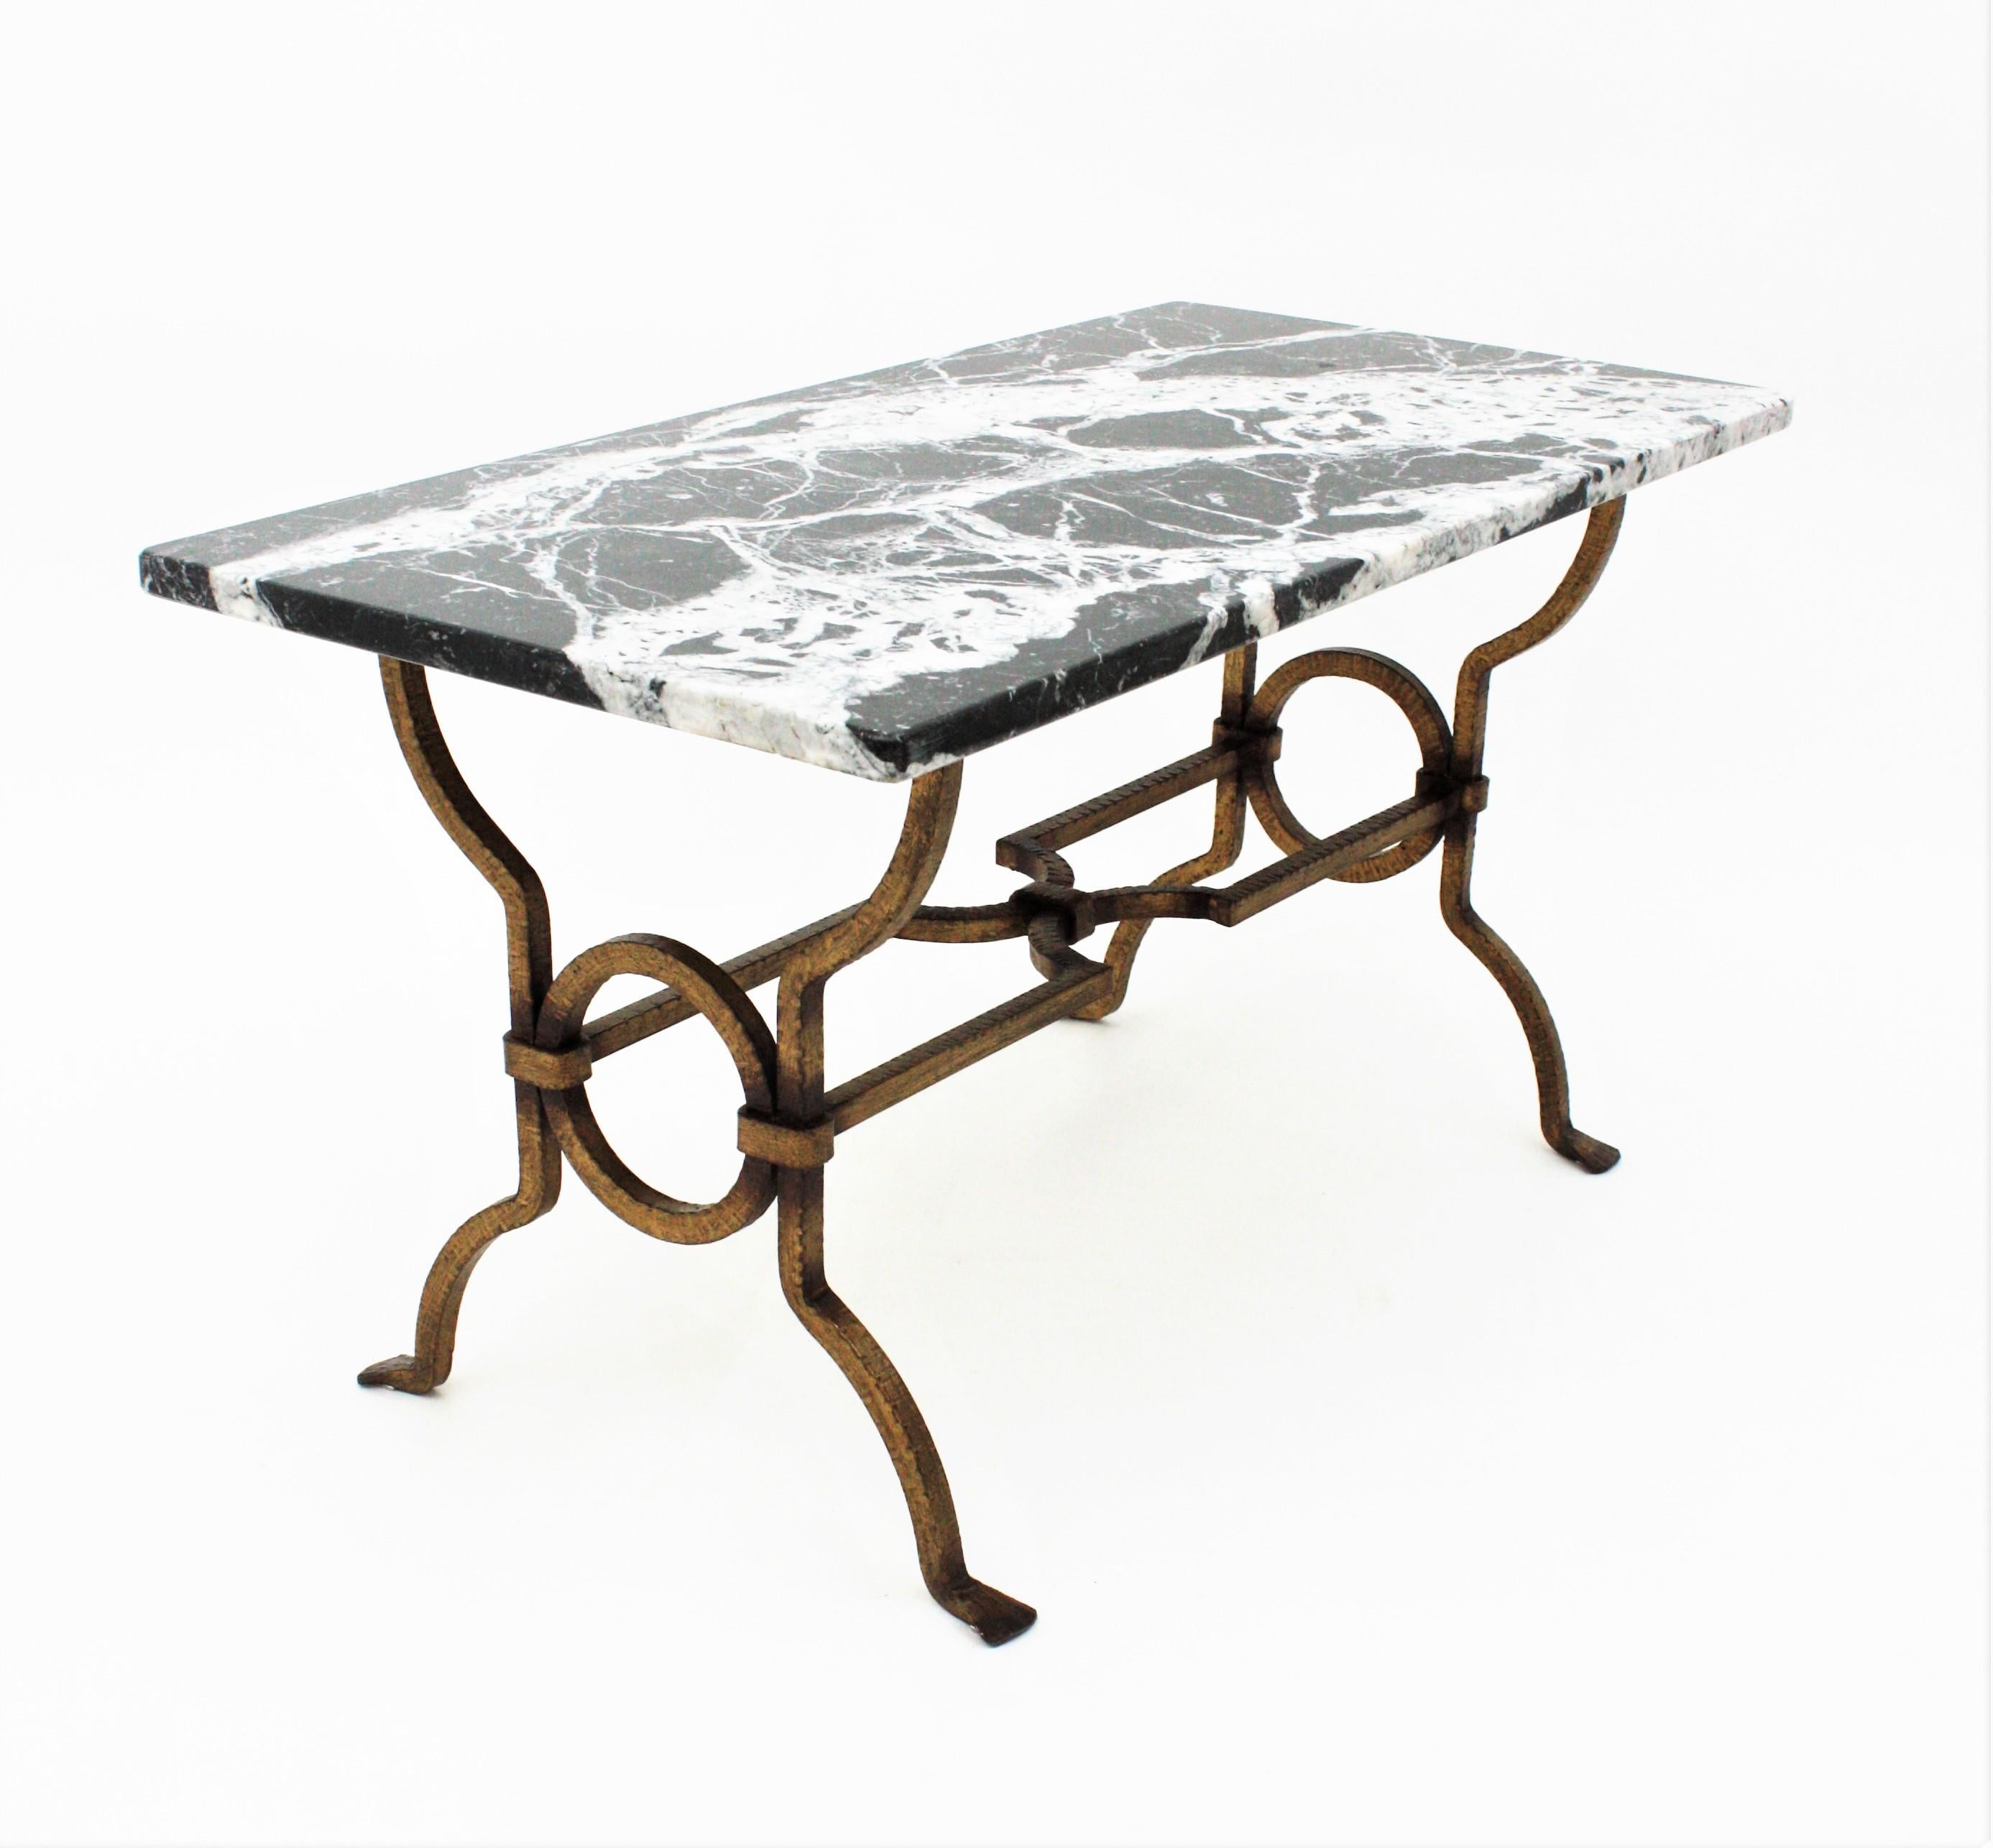 Beautiful Gilbert Poillerat wrought iron low table with black and white marble top. France, 1940s.
Stylish shapes and dramatic black marble top with white veins.
Excellent condition.
Original gold leaf gilt and beautiful aged patina.
Use it as low